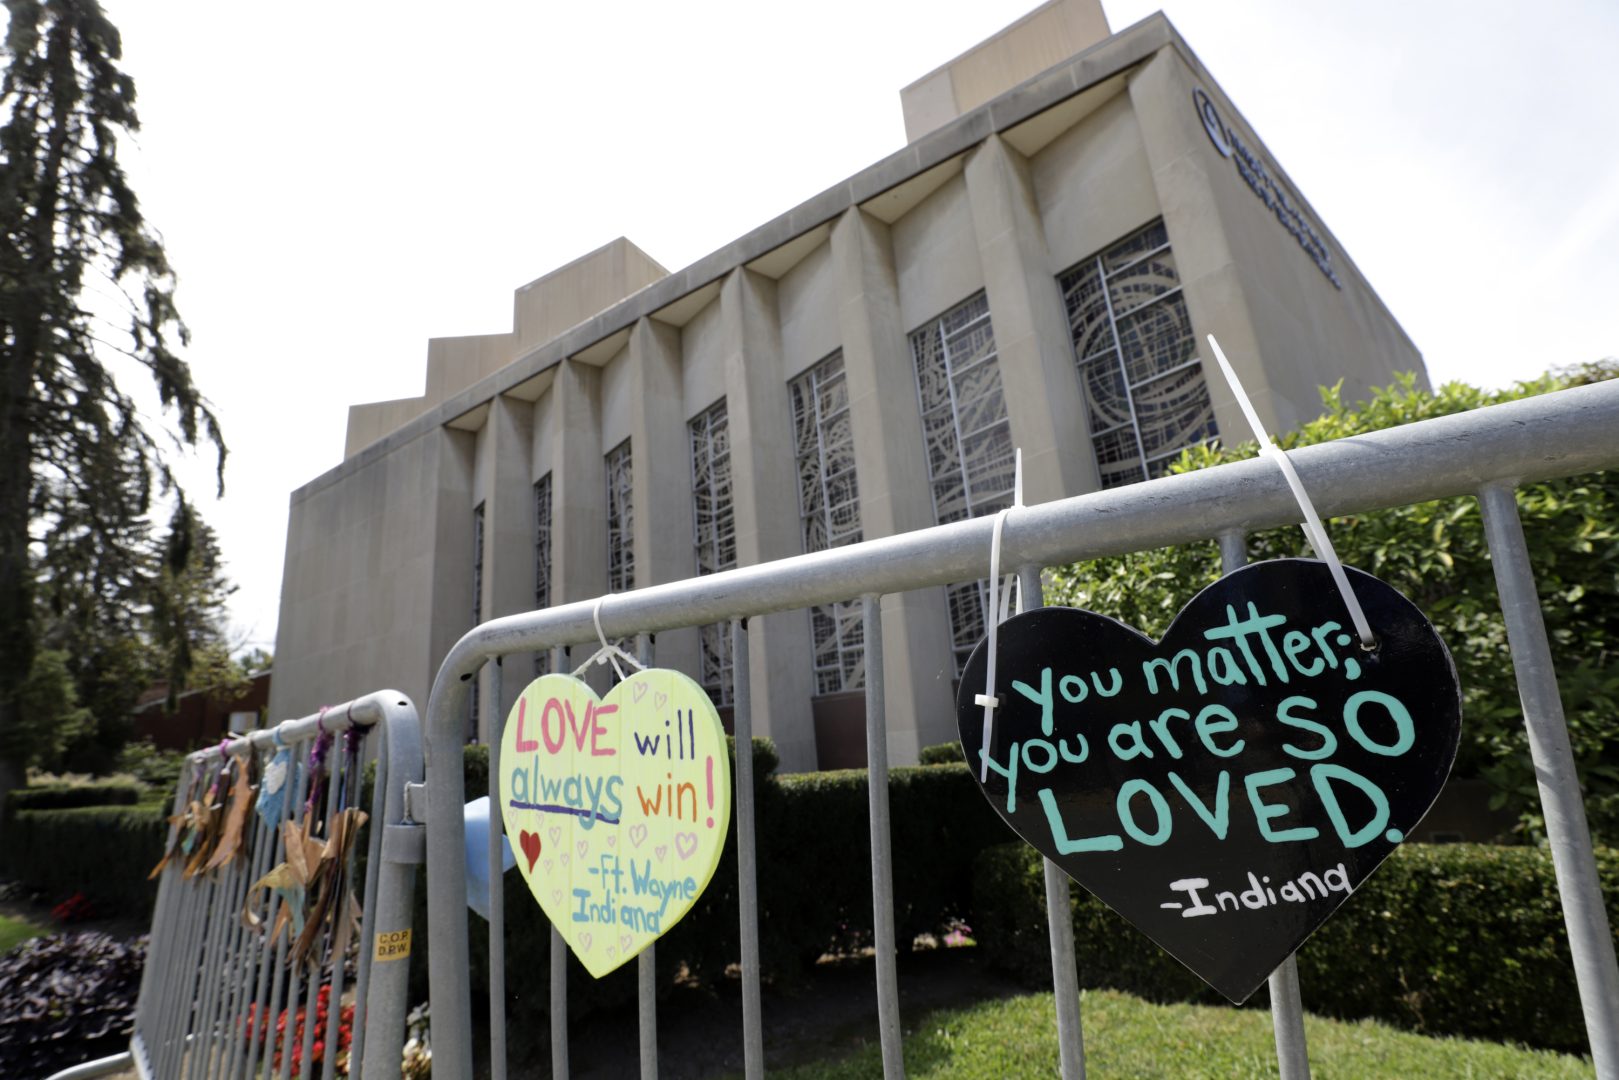 FILE - Signs hang on a fence surrounding the Tree of Life synagogue in Pittsburgh on Sept. 17, 2019.  Prosecutors told a federal judge, Thursday, Dec. 2, 2021,  in a new filing that the Pittsburgh synagogue massacre defendant’s statements at the scene should be allowed for use at trial, in part because concerns about public safety in the immediate aftermath were a valid reason to keep questioning him.  (AP Photo/Gene J. Puskar, File)